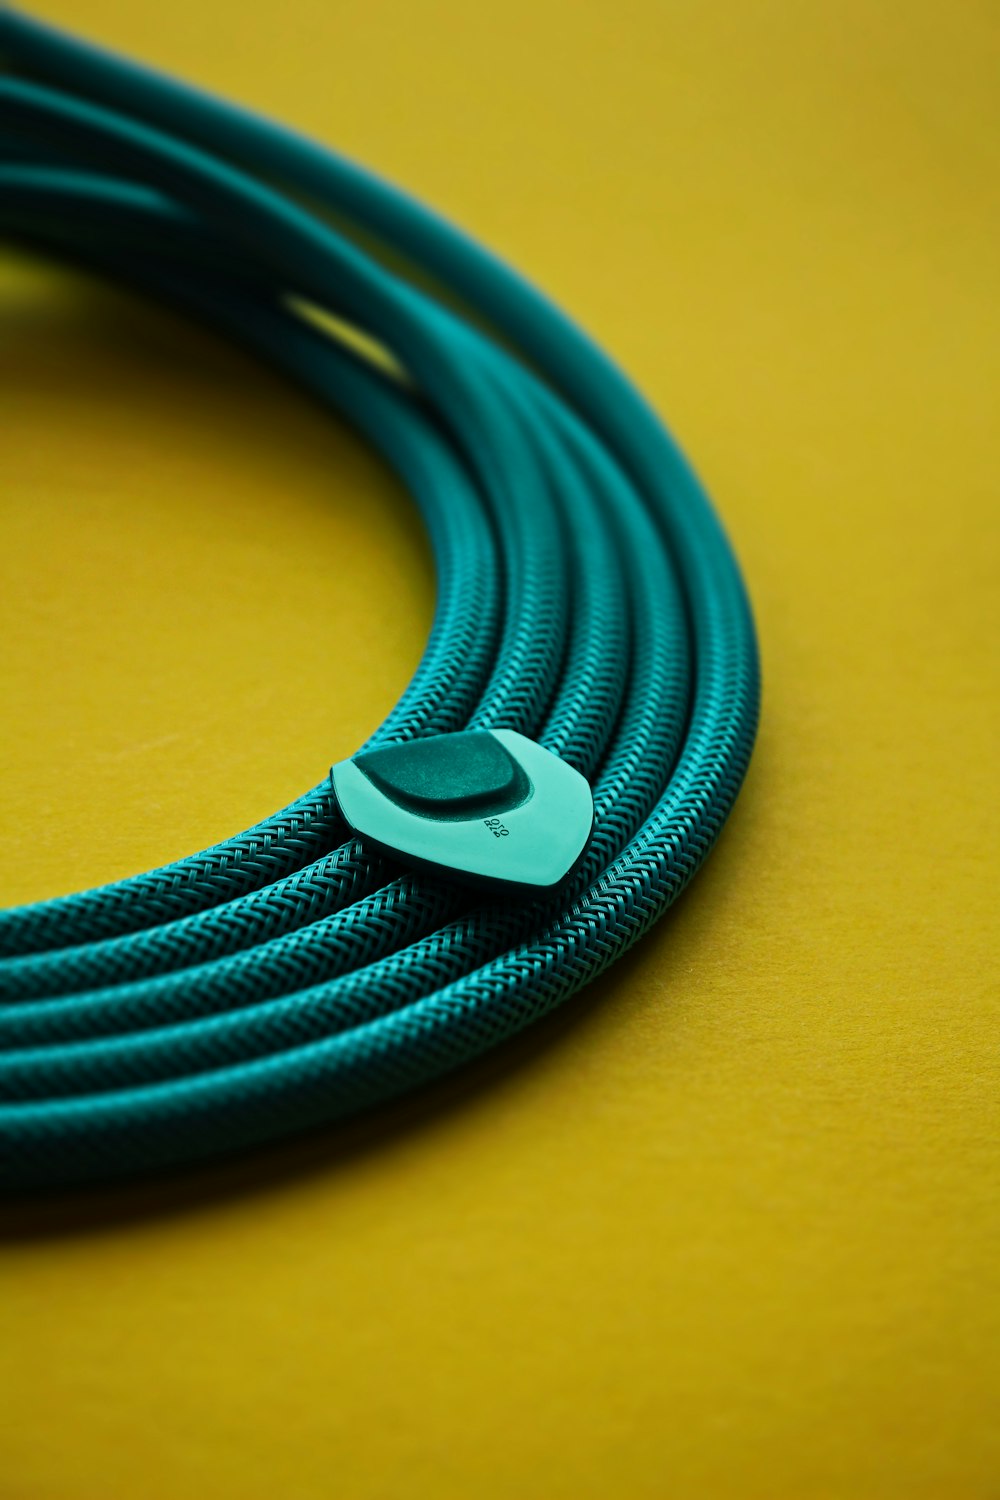 a close up of a blue cable on a yellow surface